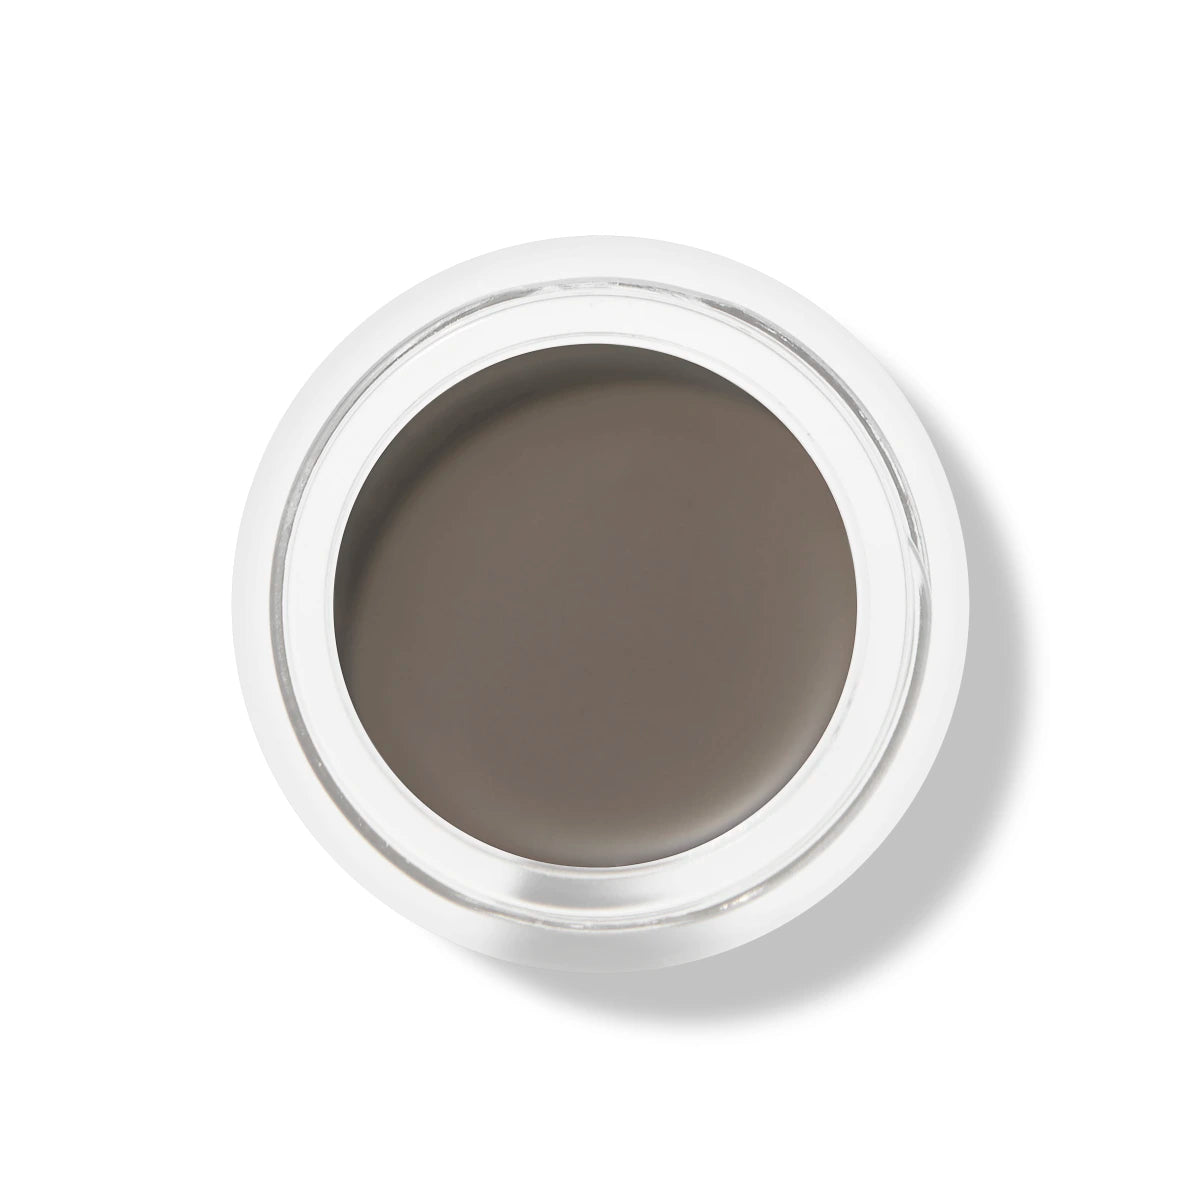 100%_pure_the_skincare_district_uae_middle_east_Long_Last_Brows_Taupe_Primary